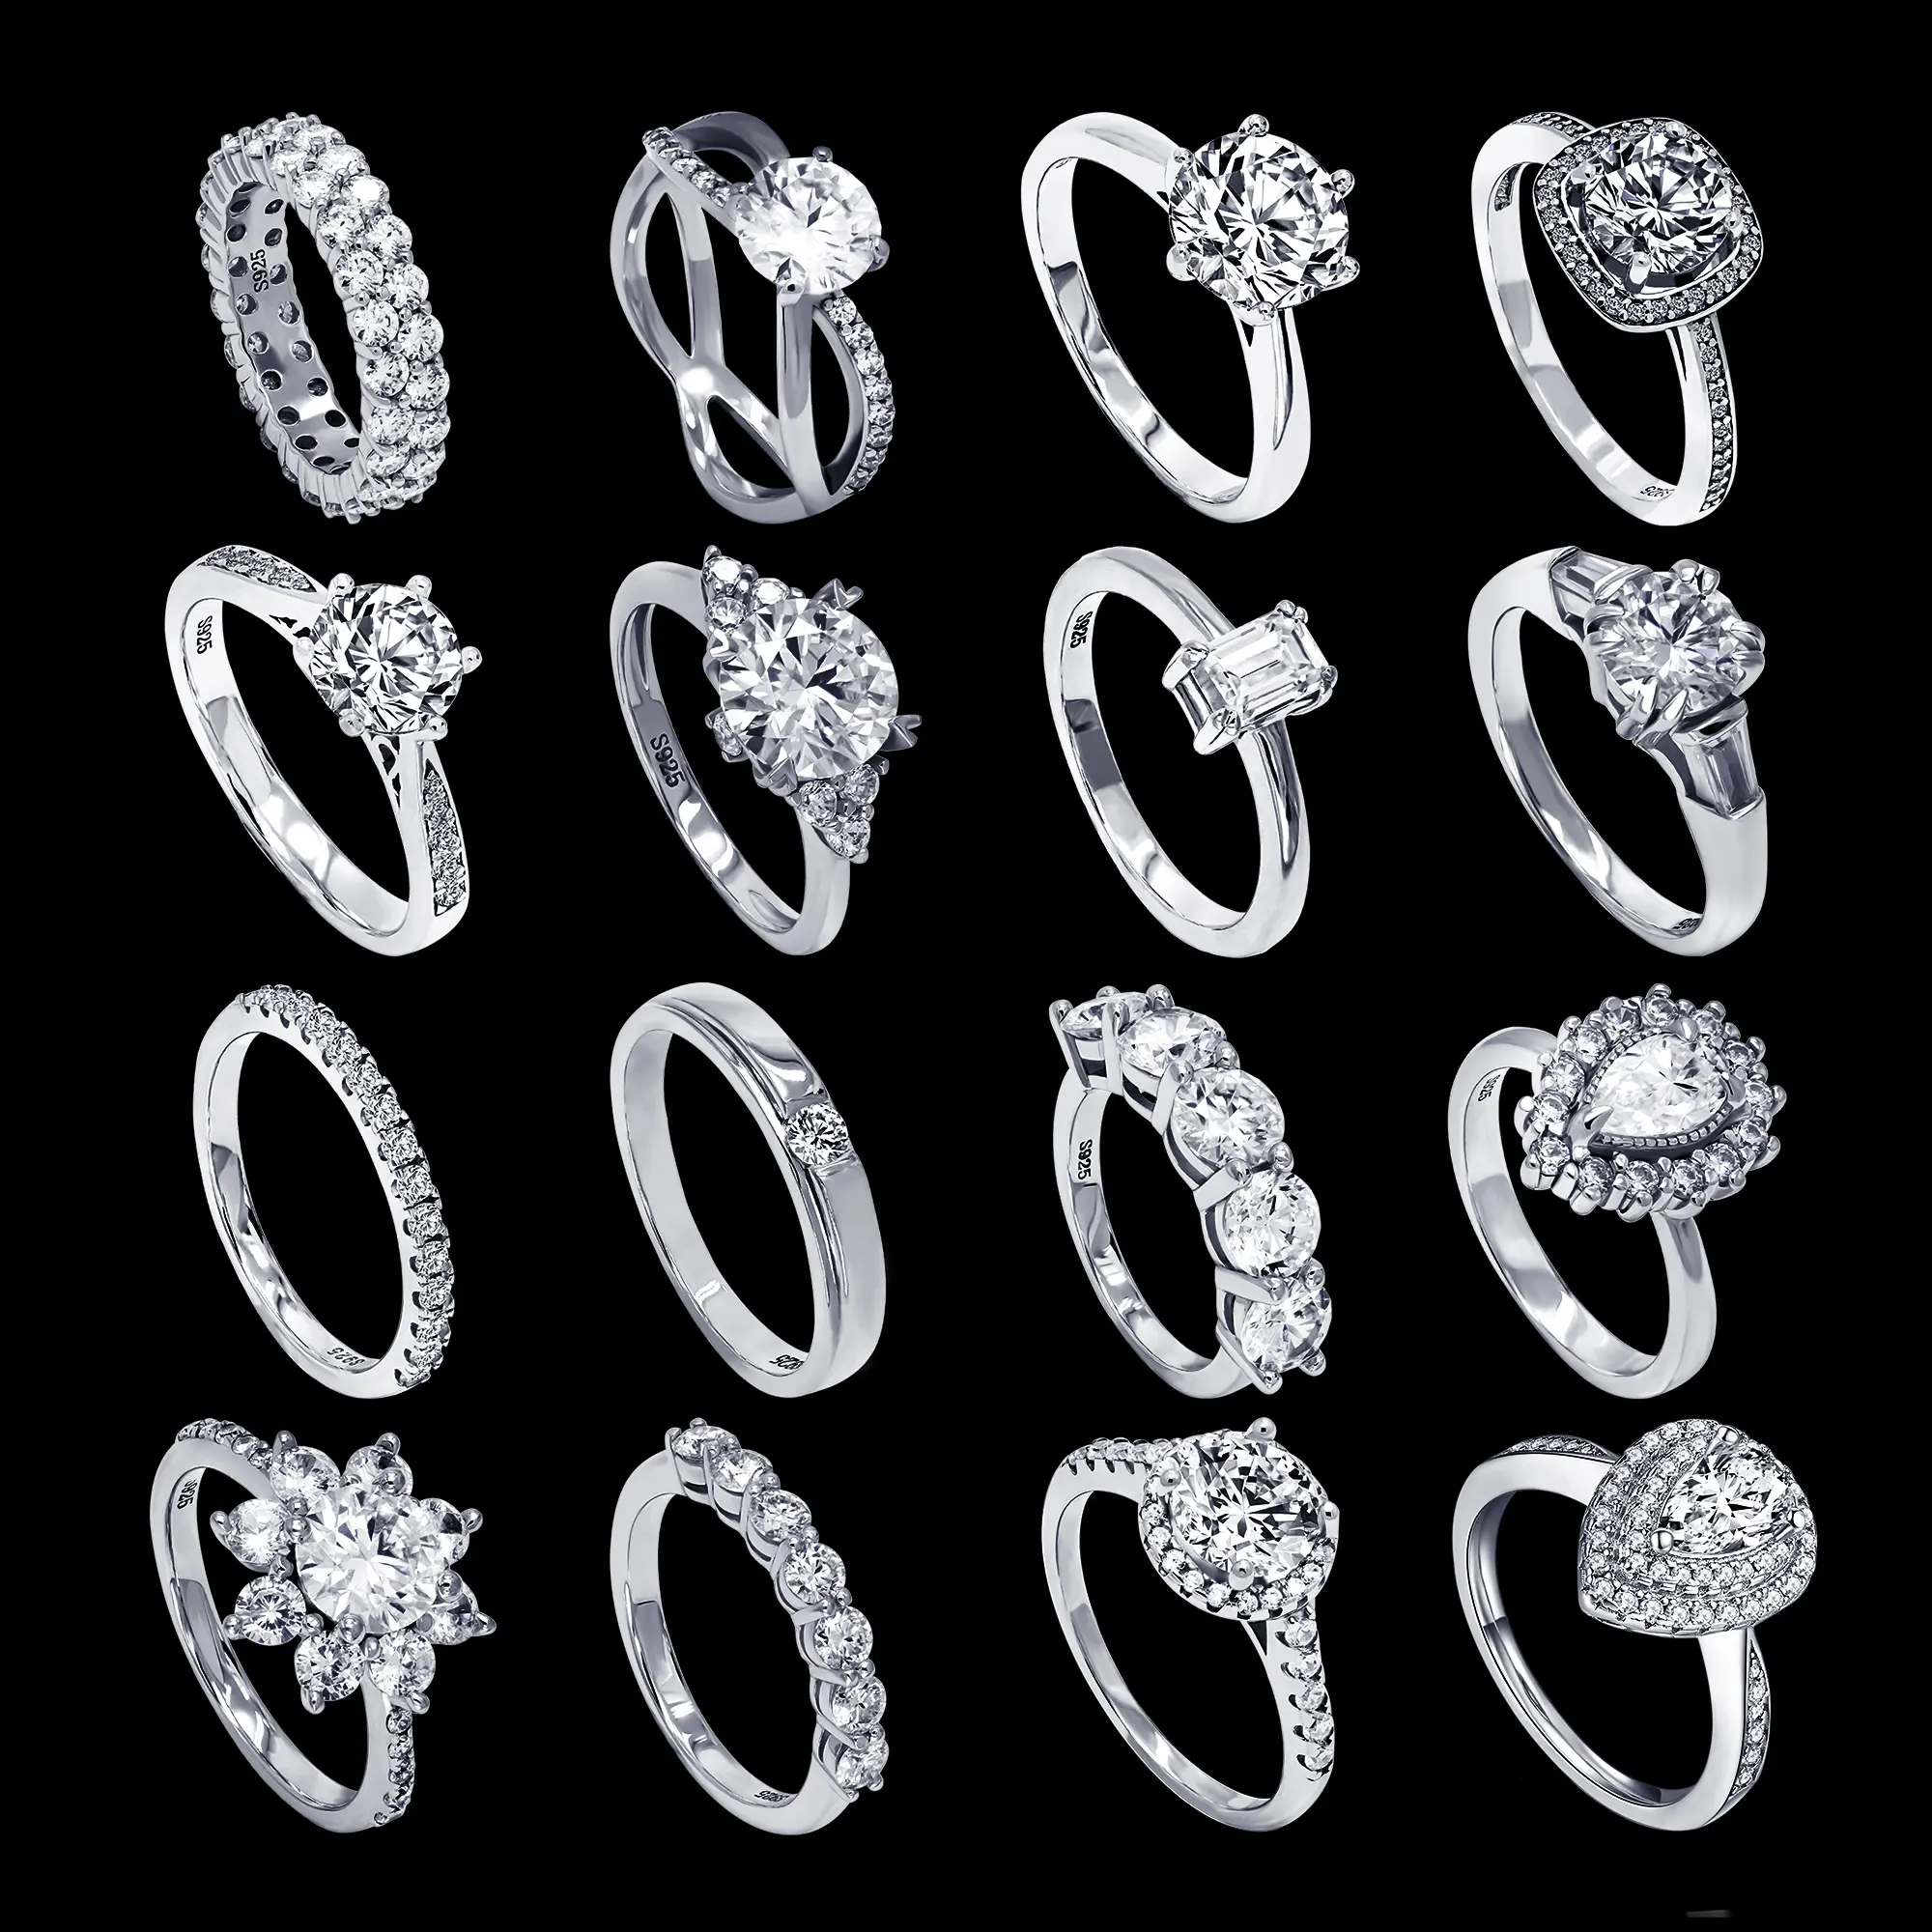 Xingyue Various Gold-plated 925 Sterling Silver Jewelry Inlaid Moissanite Diamond Wedding Band Eternity Ring